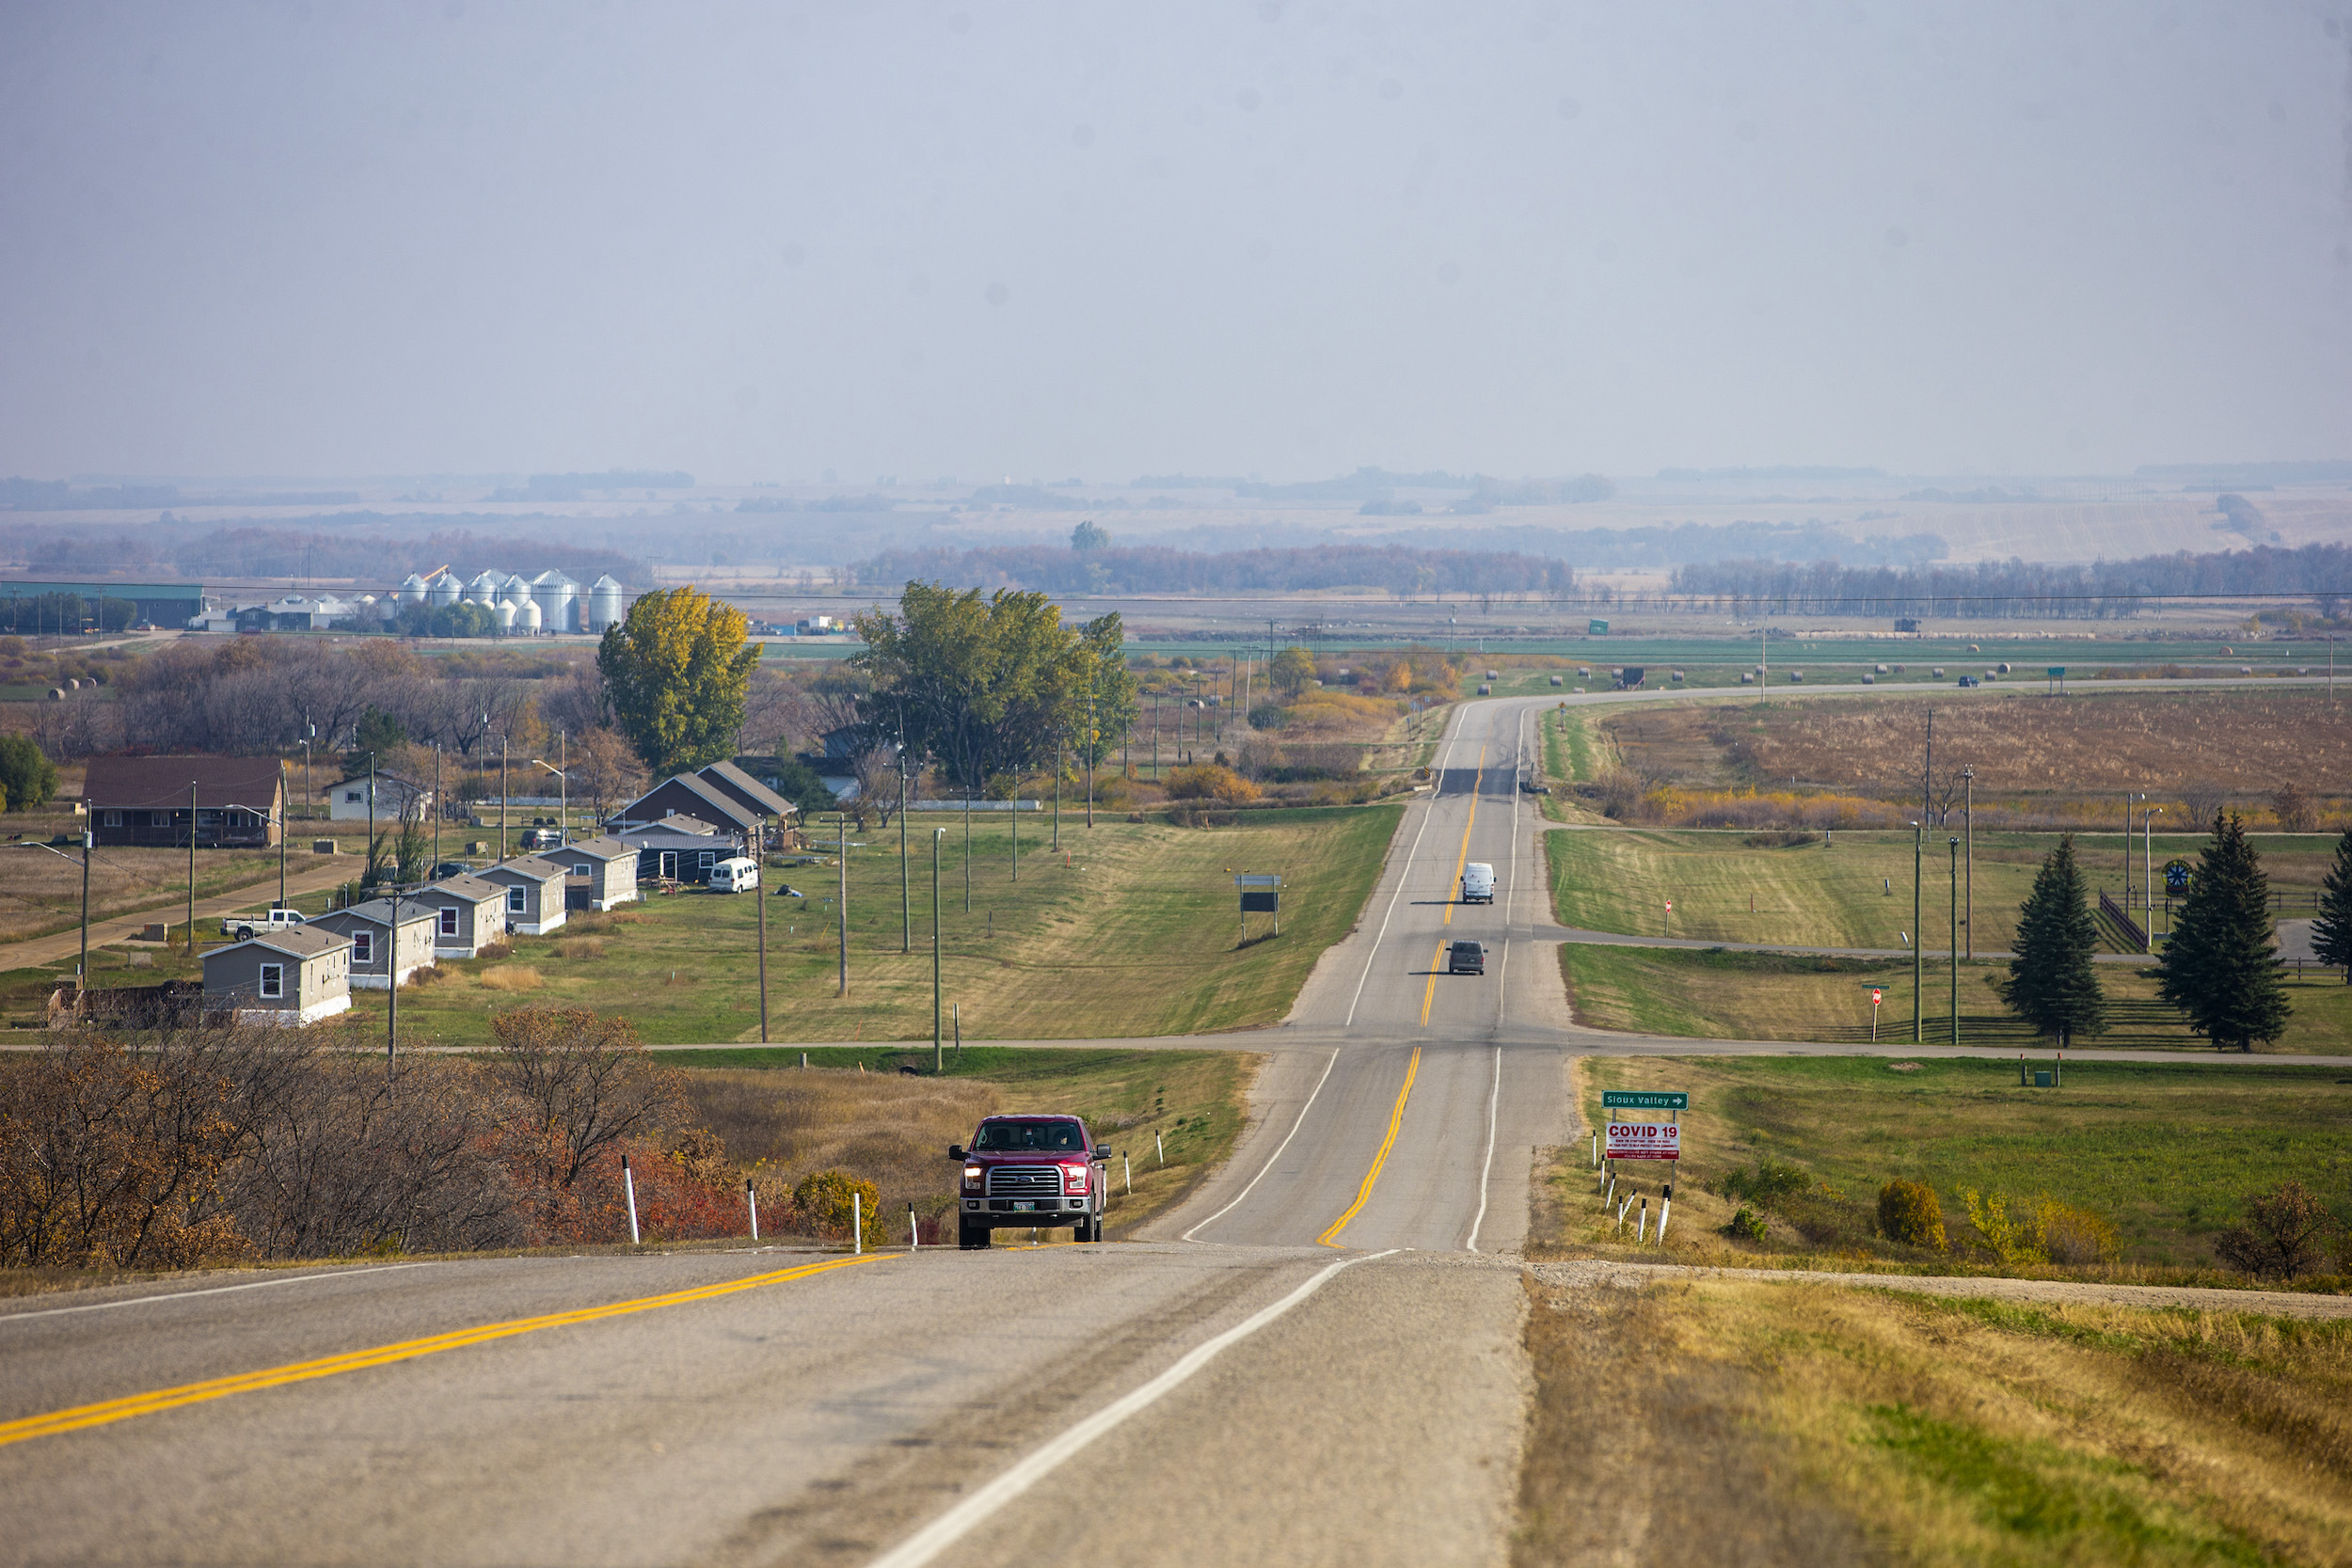 View of highway between houses and farmland